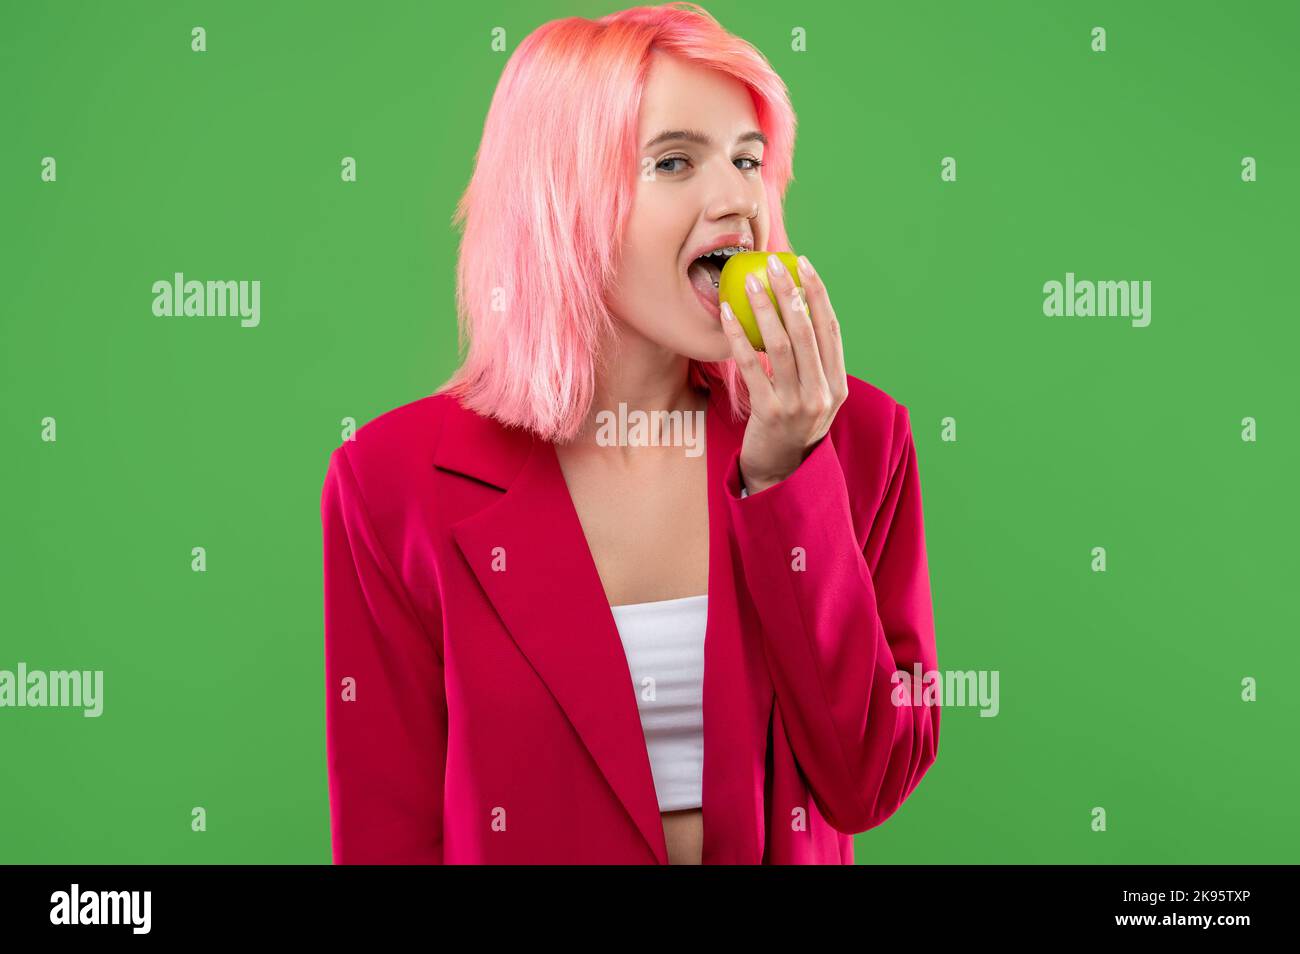 Extravagant young female eating healthy fresh fruit Stock Photo